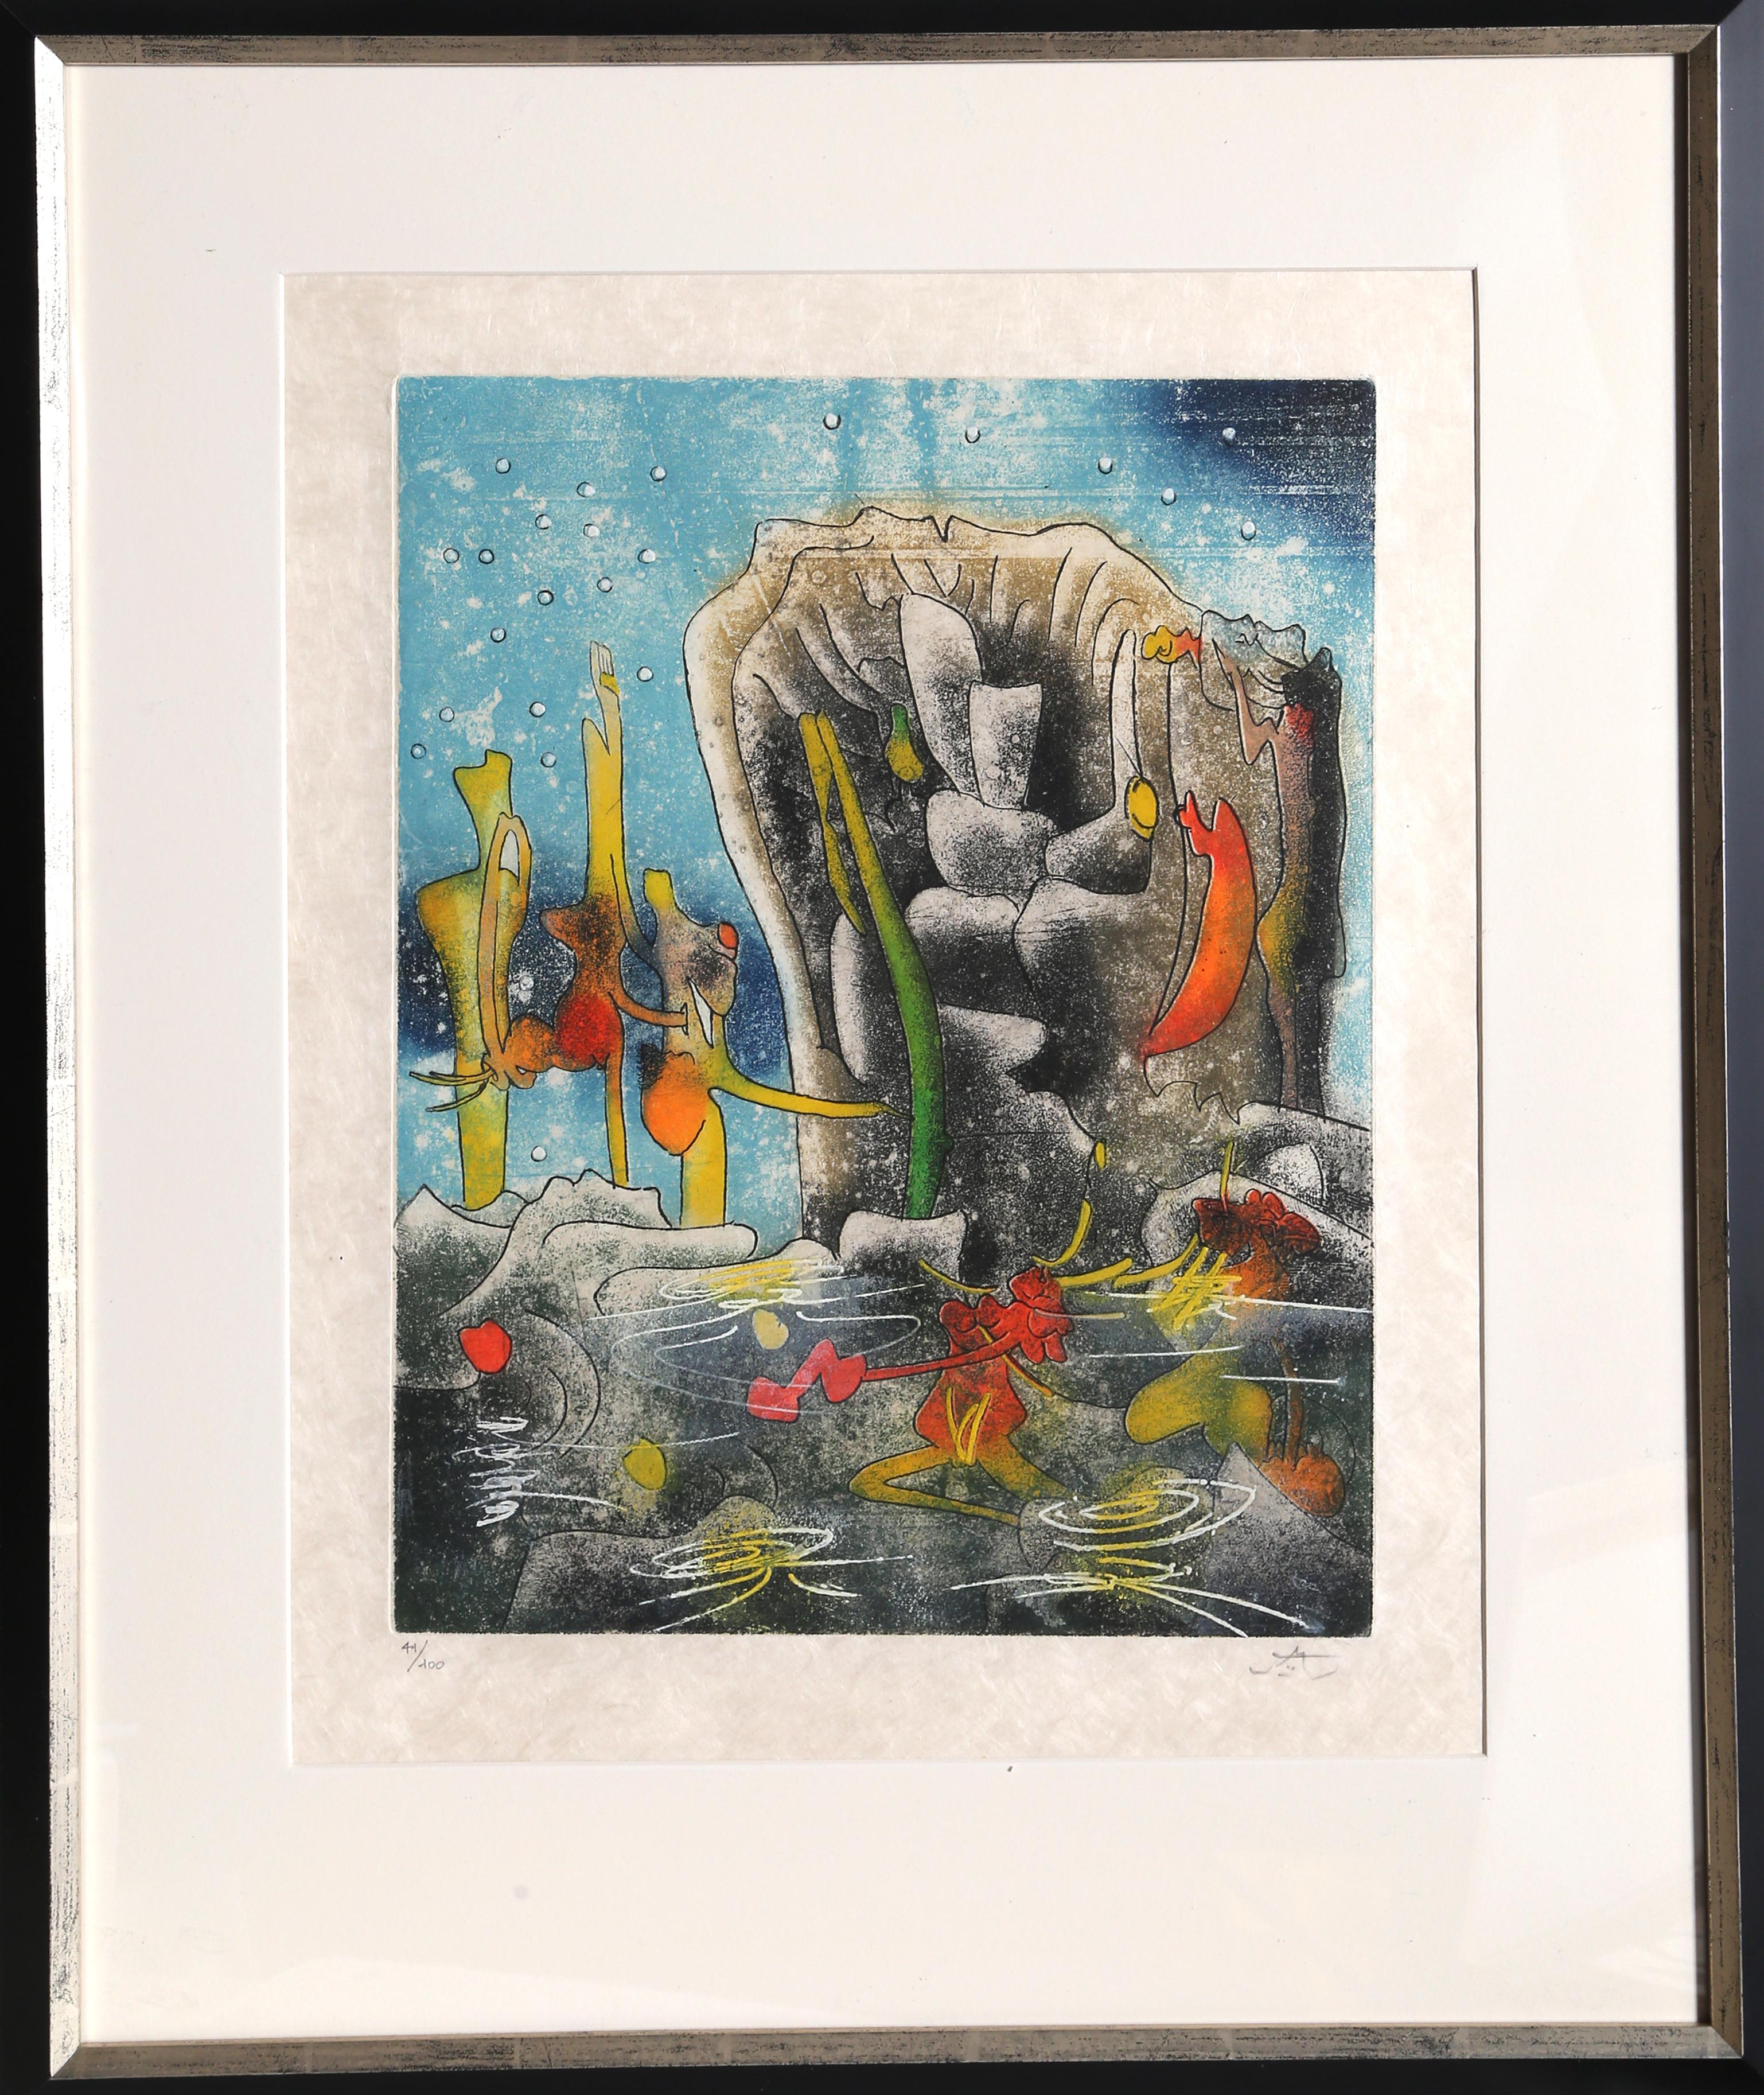 "Nymphee" is a colorful Roberto Matta etching from his Requiem pour la Fin des Temps suite. The print is signed and numbered (44/100) in pencil with the printer's blindstamp (Georges Visat) lower right. Image size 16 x 12.5 inches.